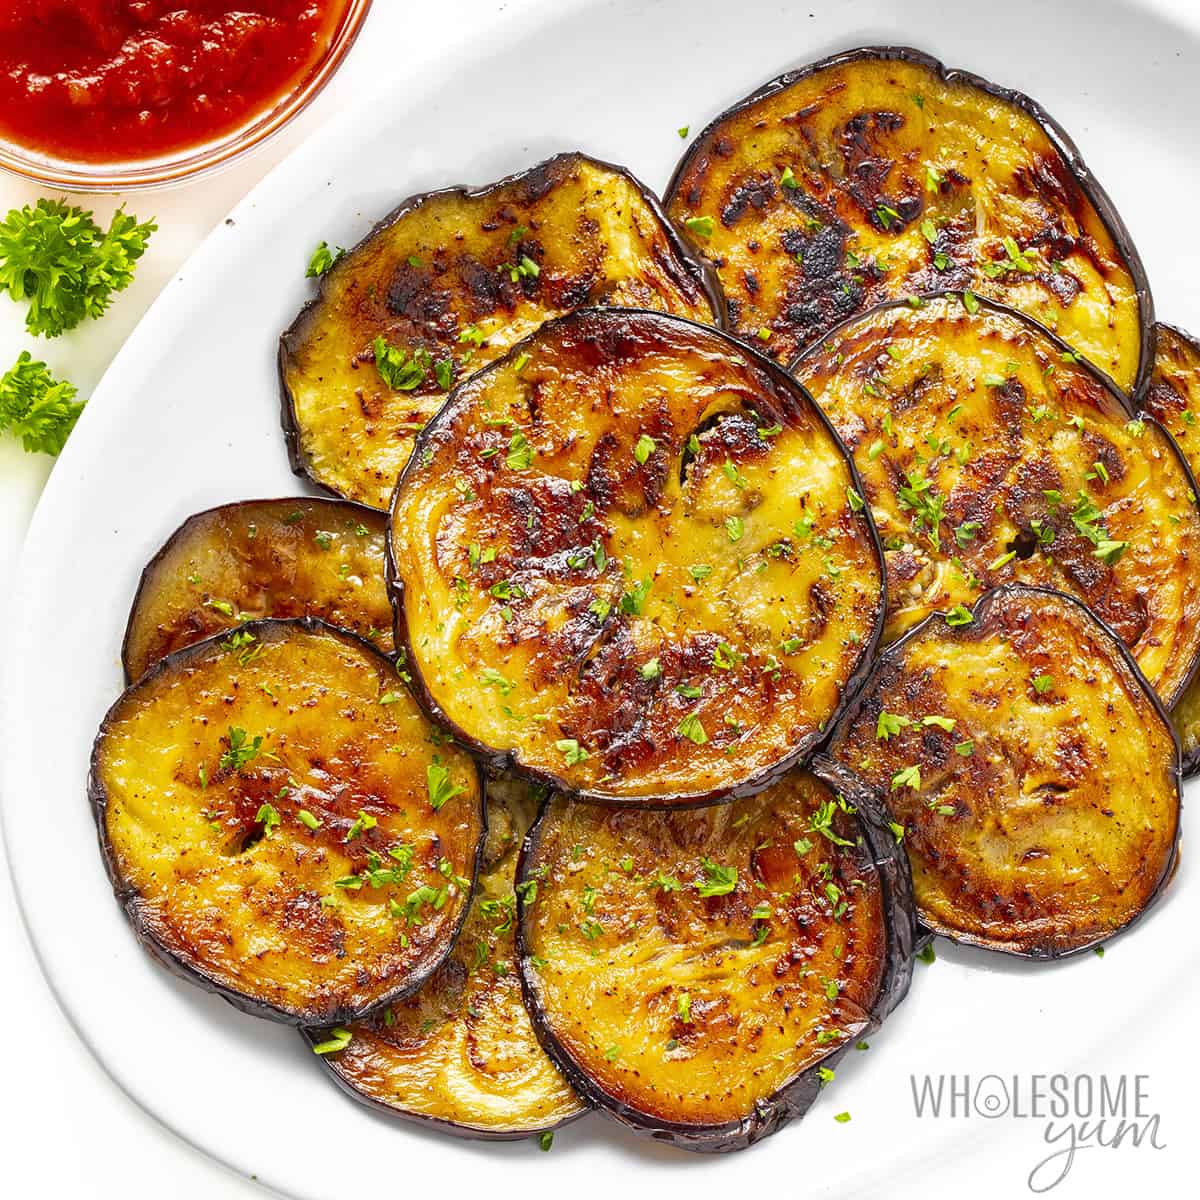 Cooked eggplant recipe with fresh herbs for garnish.